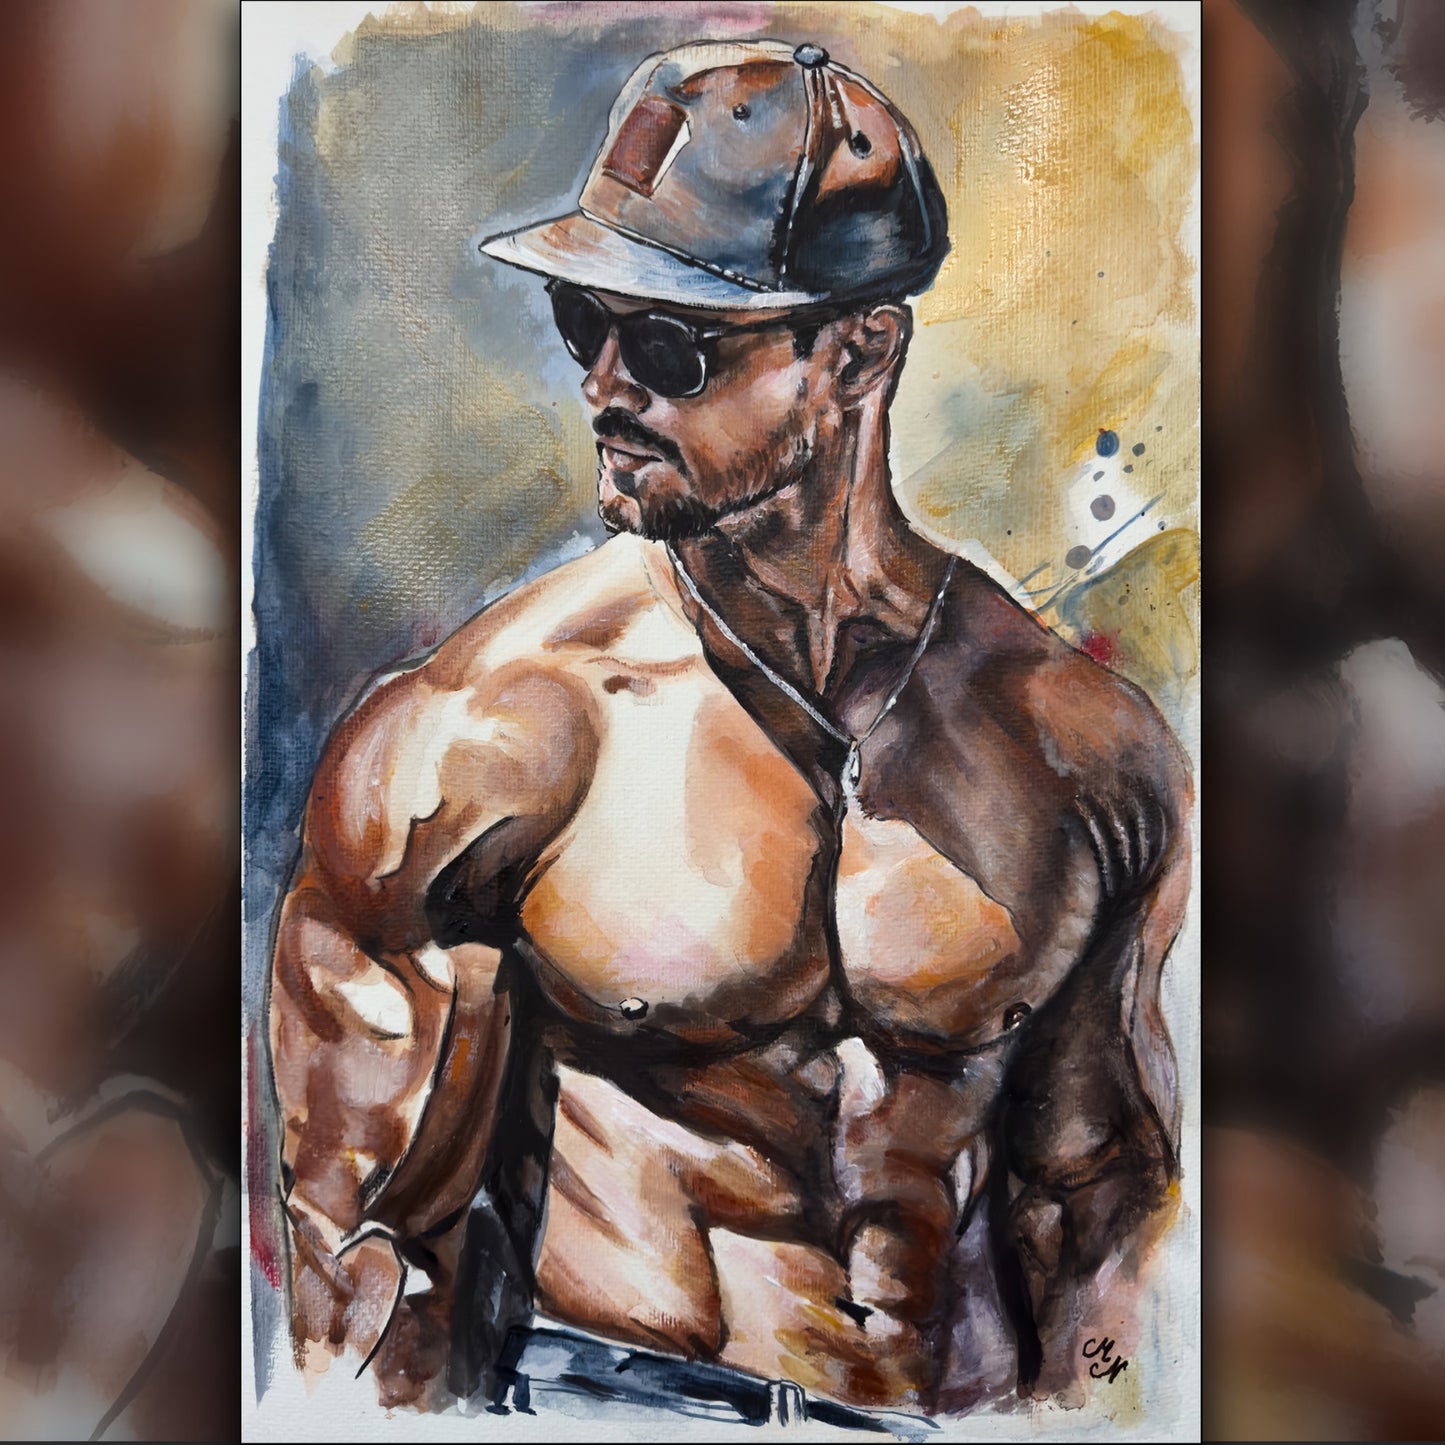 Acrylic, watercolour, and ink artwork of a muscular man